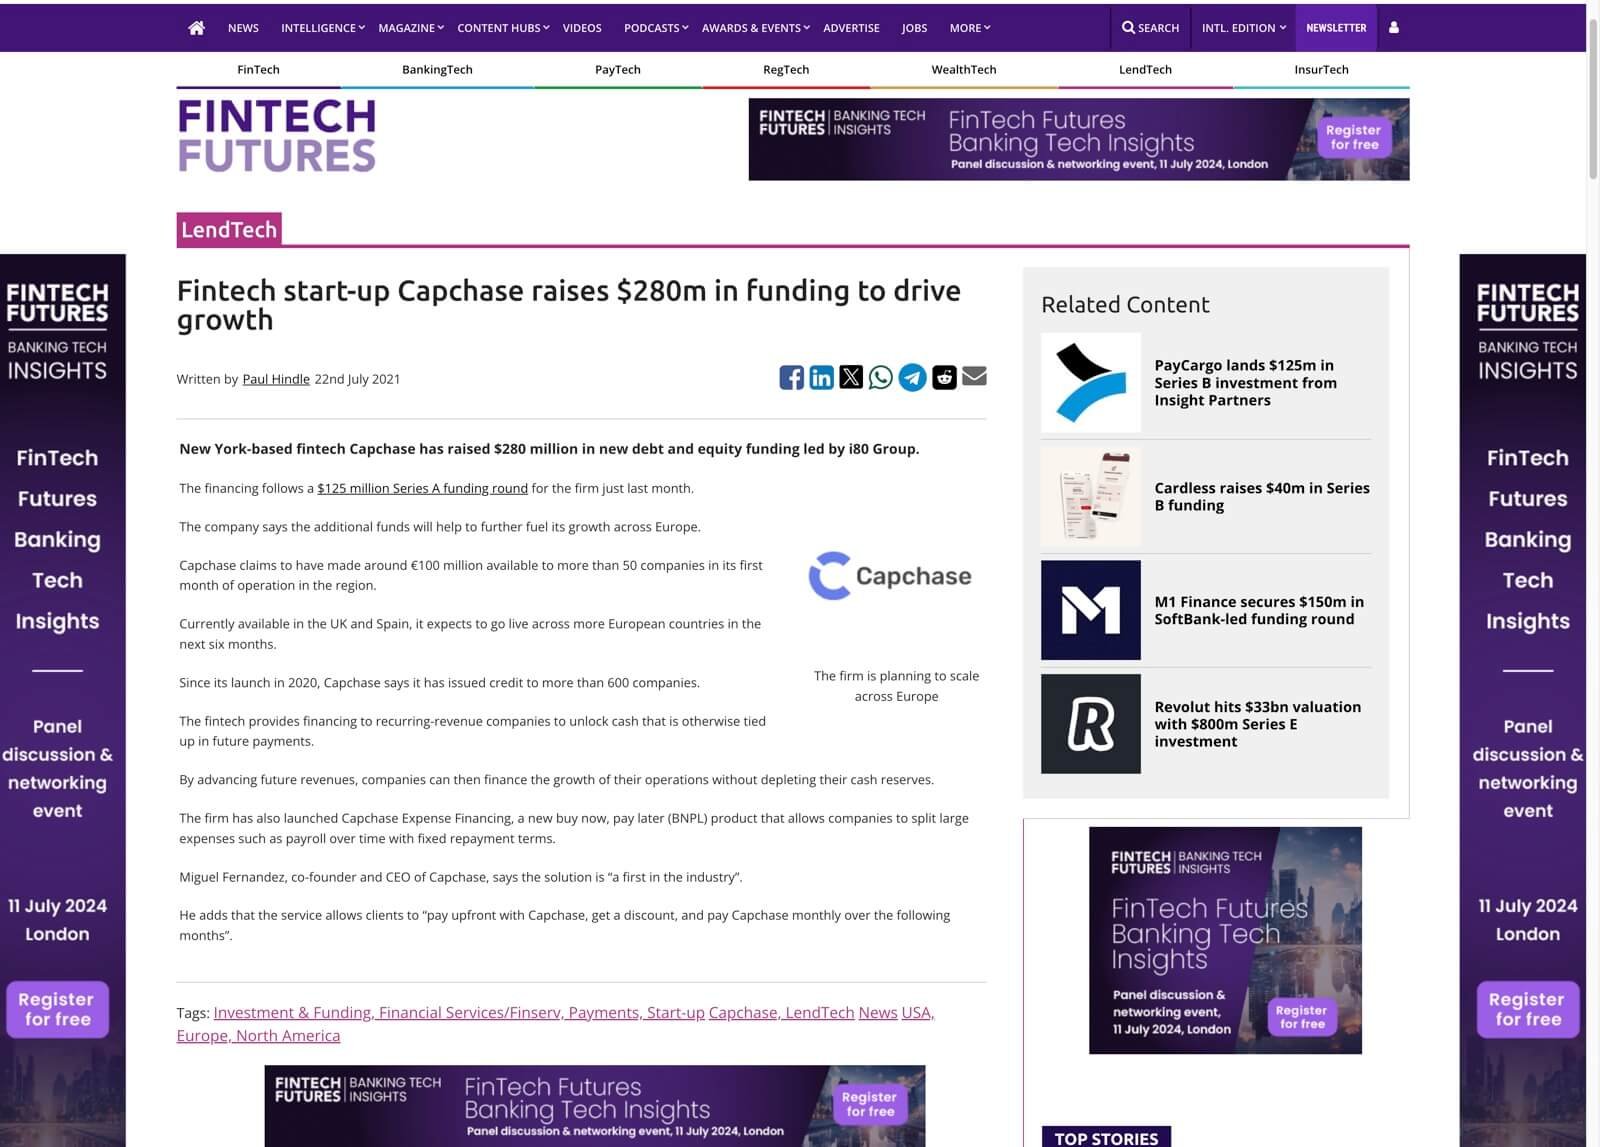 Fintech-start-up-Capchase-raises-280m-in-funding-to-drive-growth.jpg